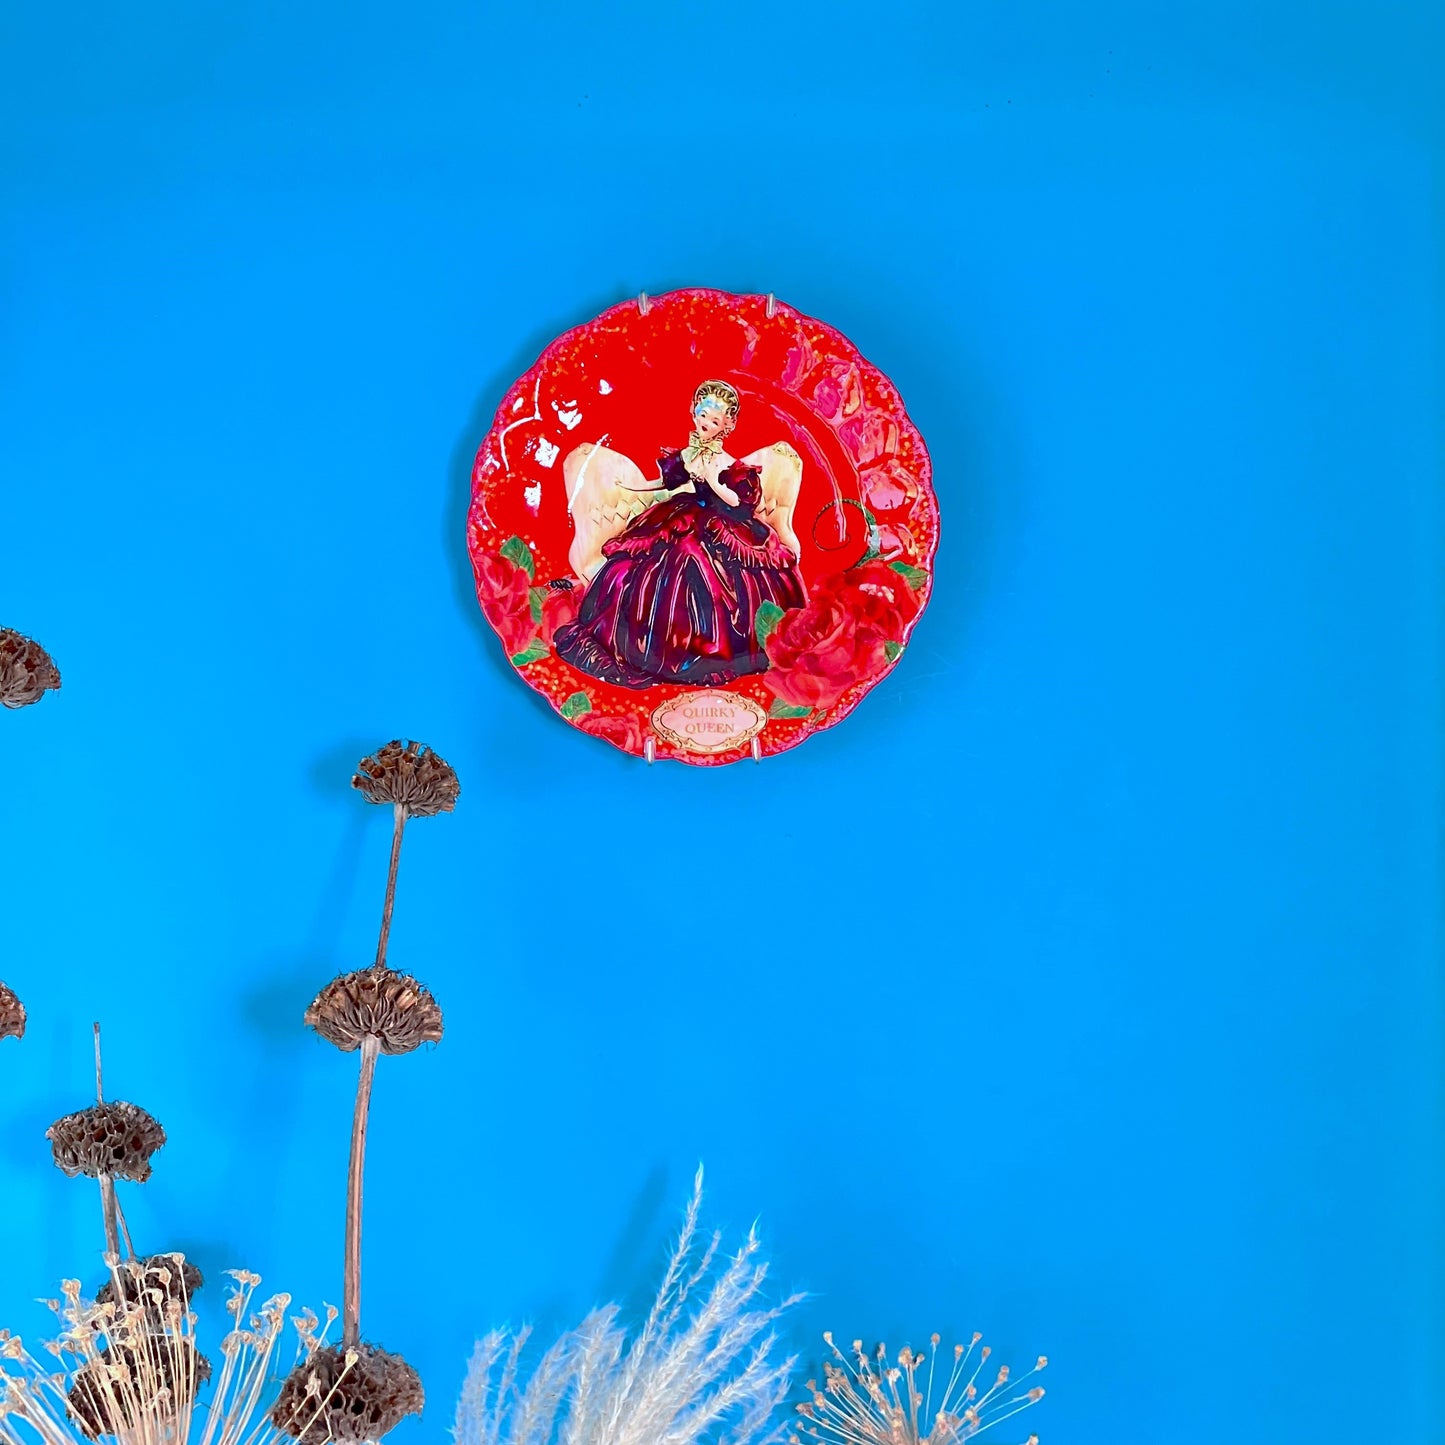 Quirky Queen Wall Plate by House of Frisson, featuring a kitsch porcelain figure of a lady surrounded by red roses and House of Frisson's creatures, against a red background. Plate hanging on a blue wall.